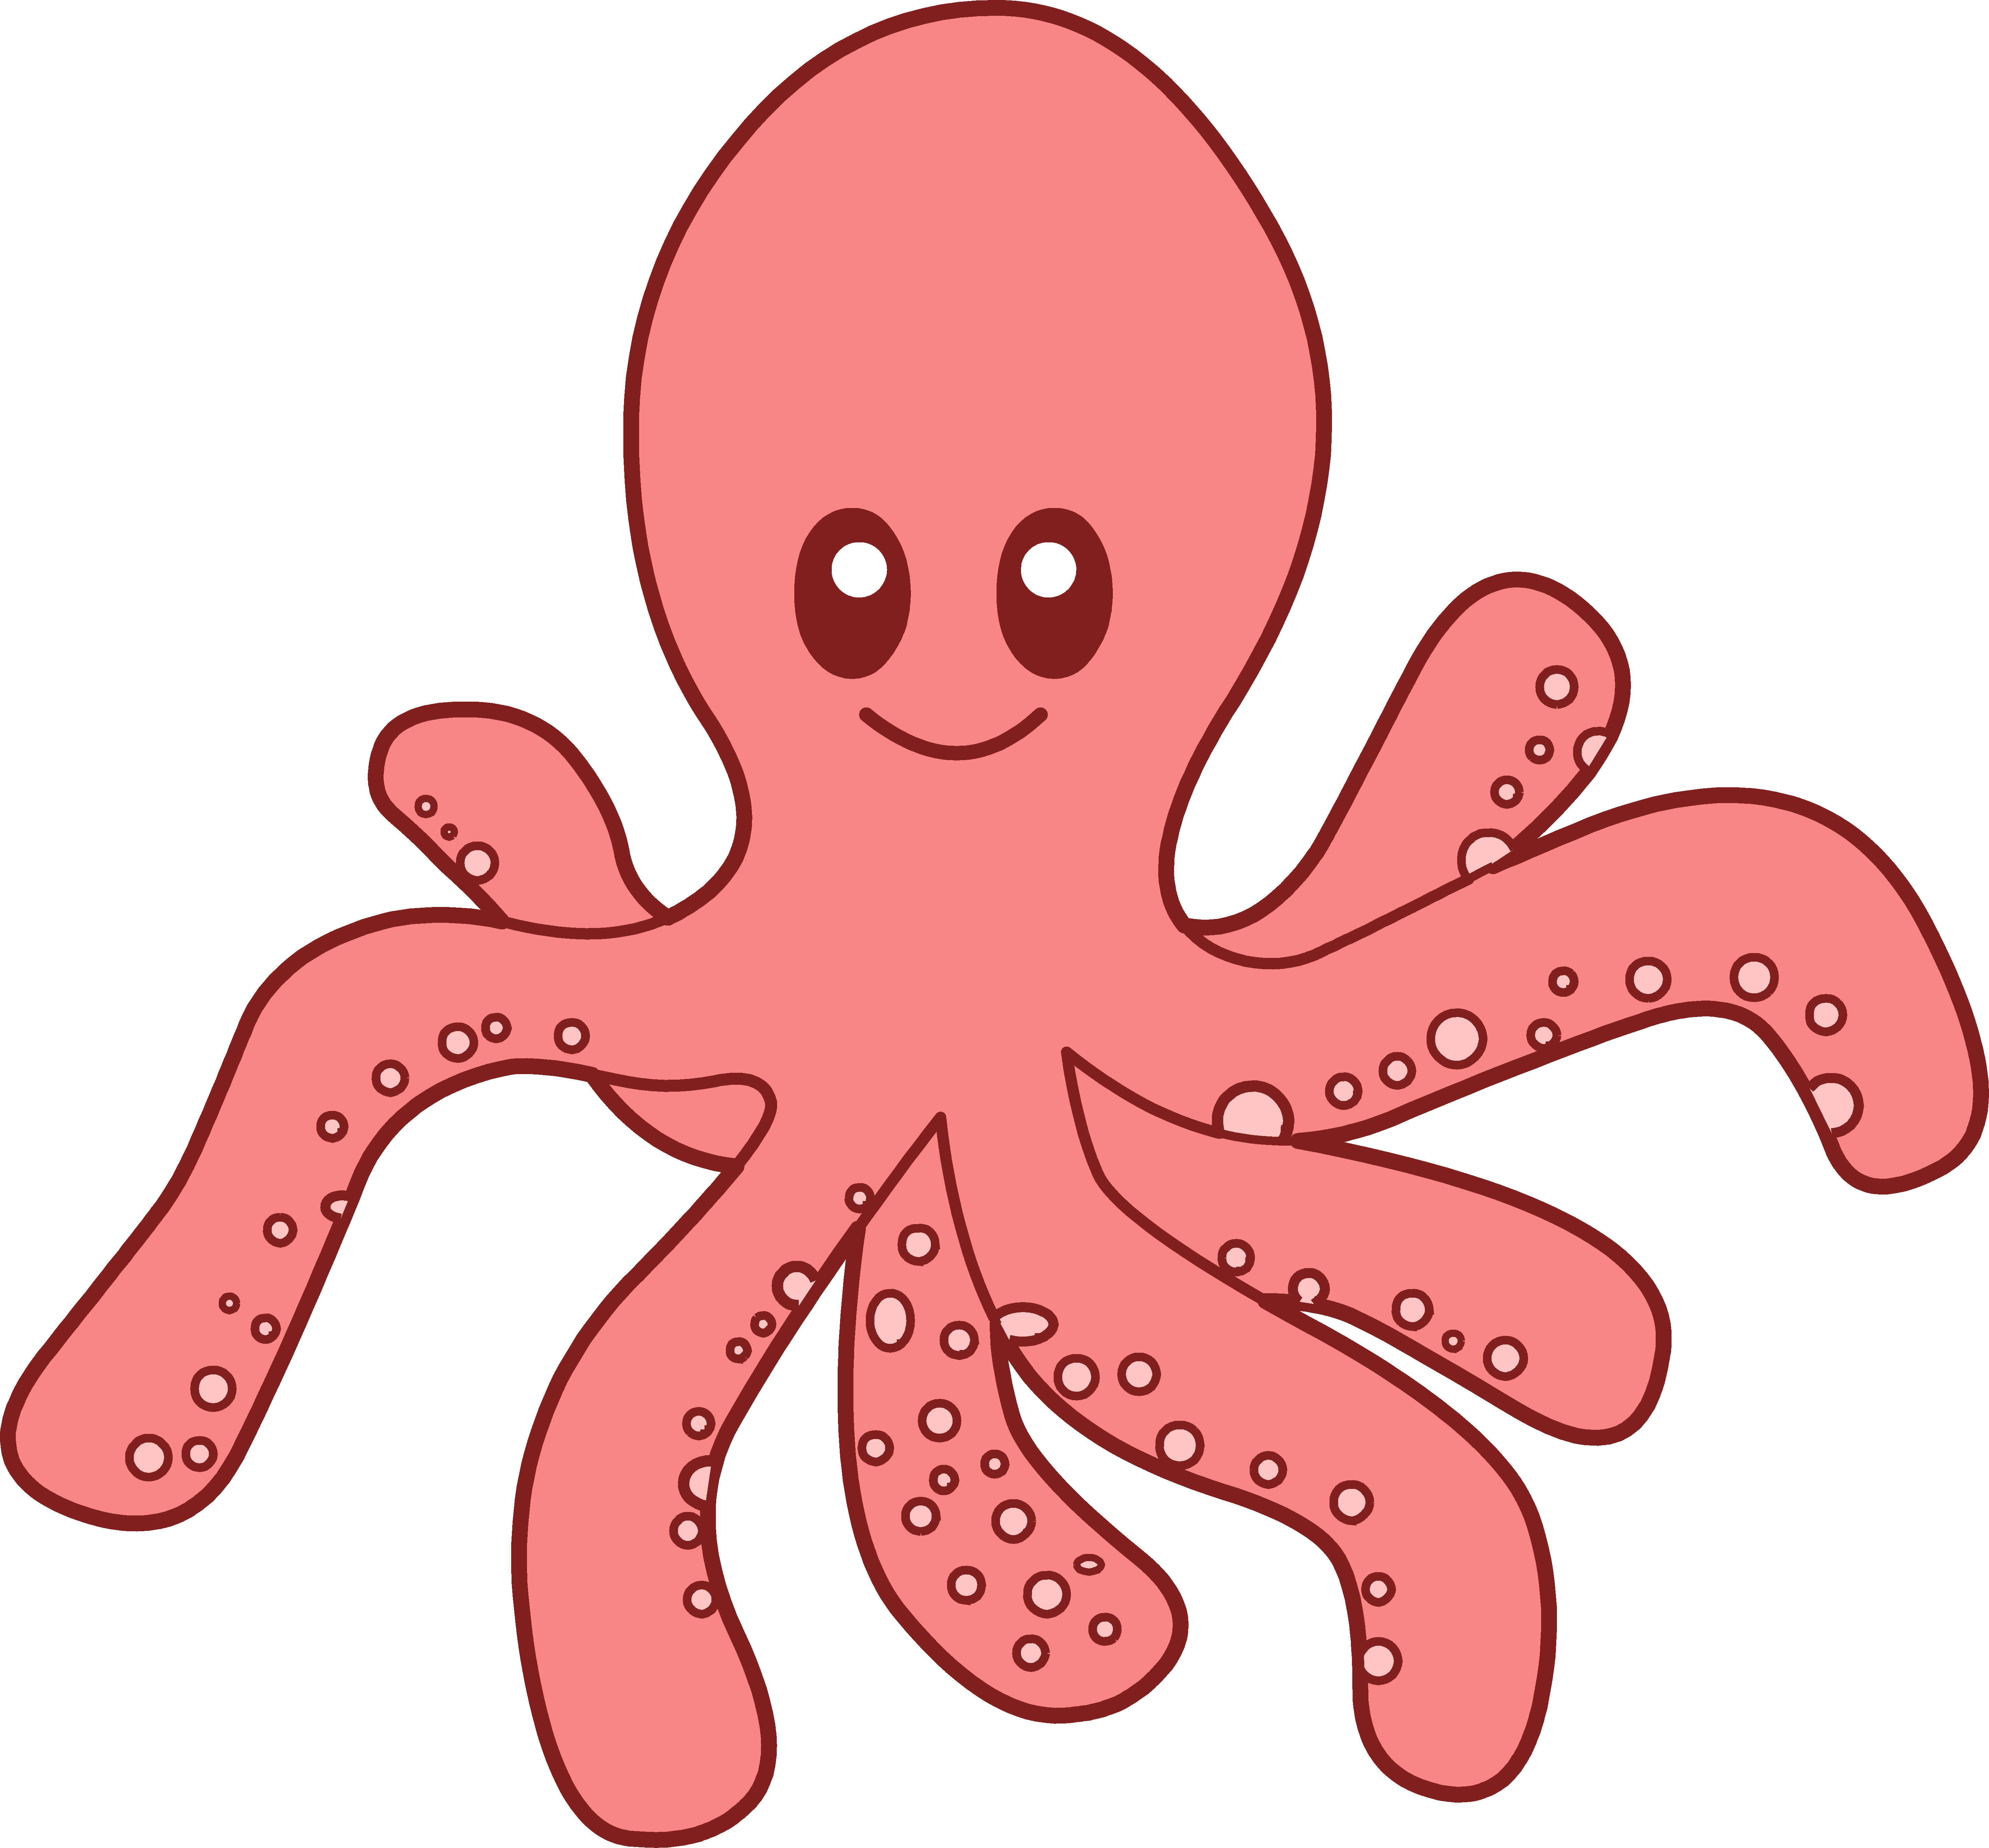 Amazing How To Draw Cartoon Octopus of the decade The ultimate guide 